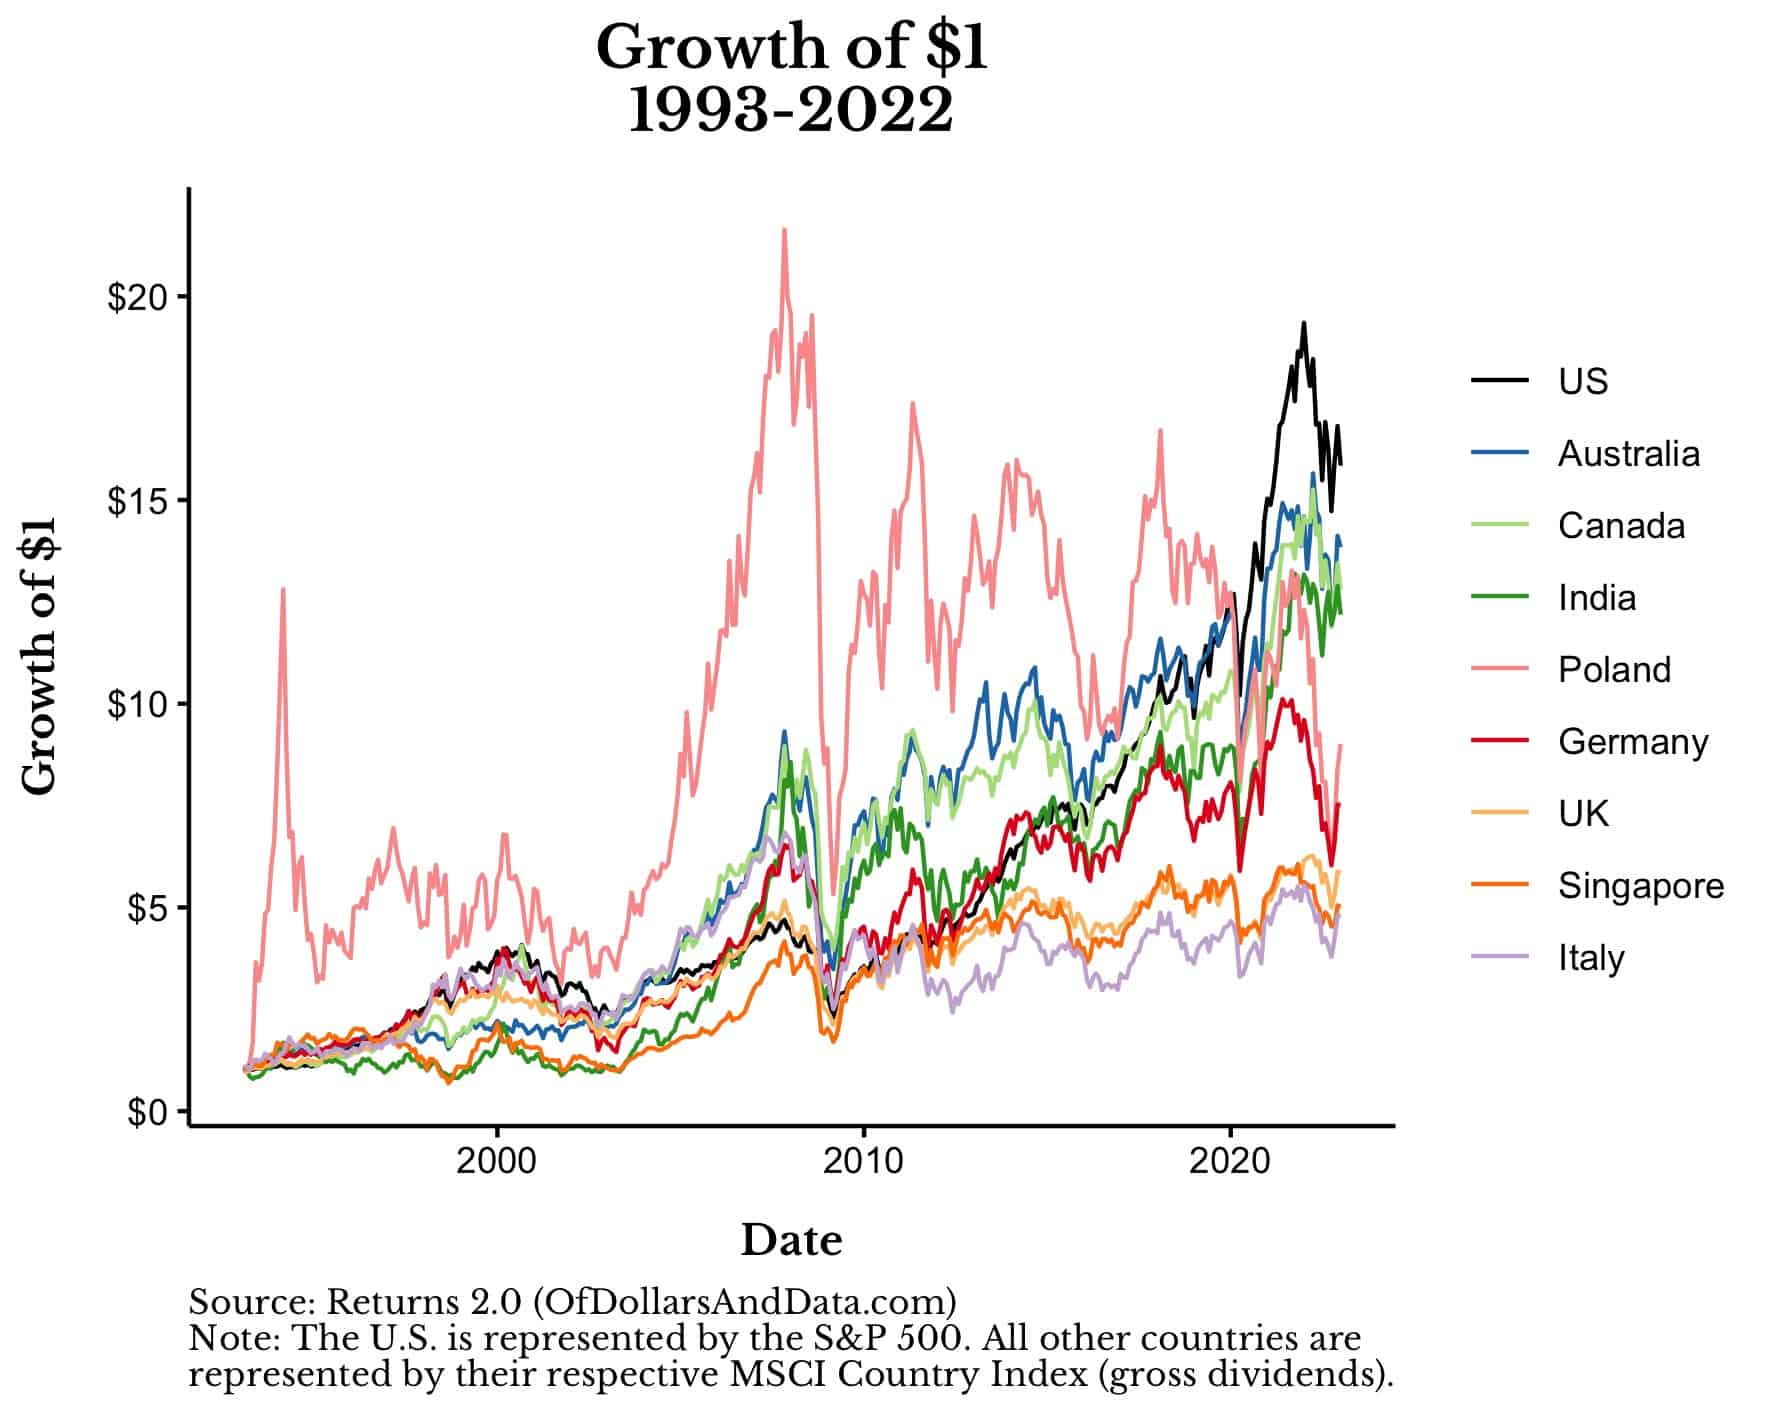 Chart showing growth of $1 from 1993 to 2022 for international stocks from 9 different markets around the globe.